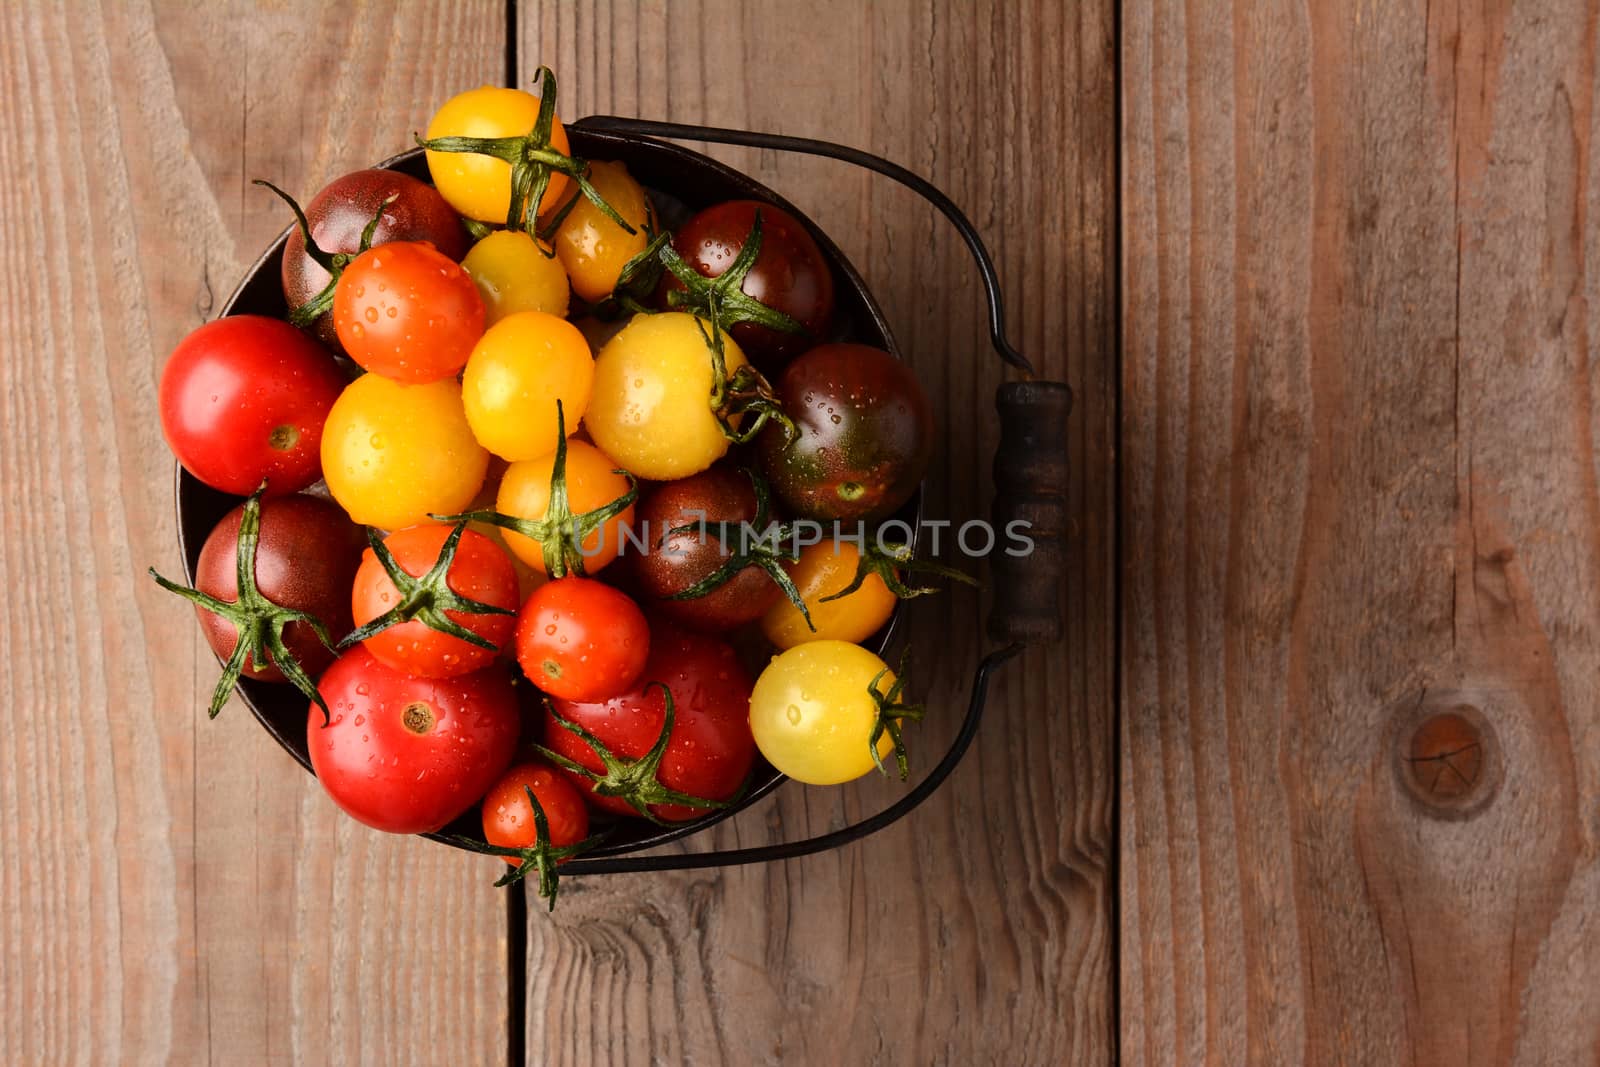 Baby Heirloom Tomatoes by sCukrov